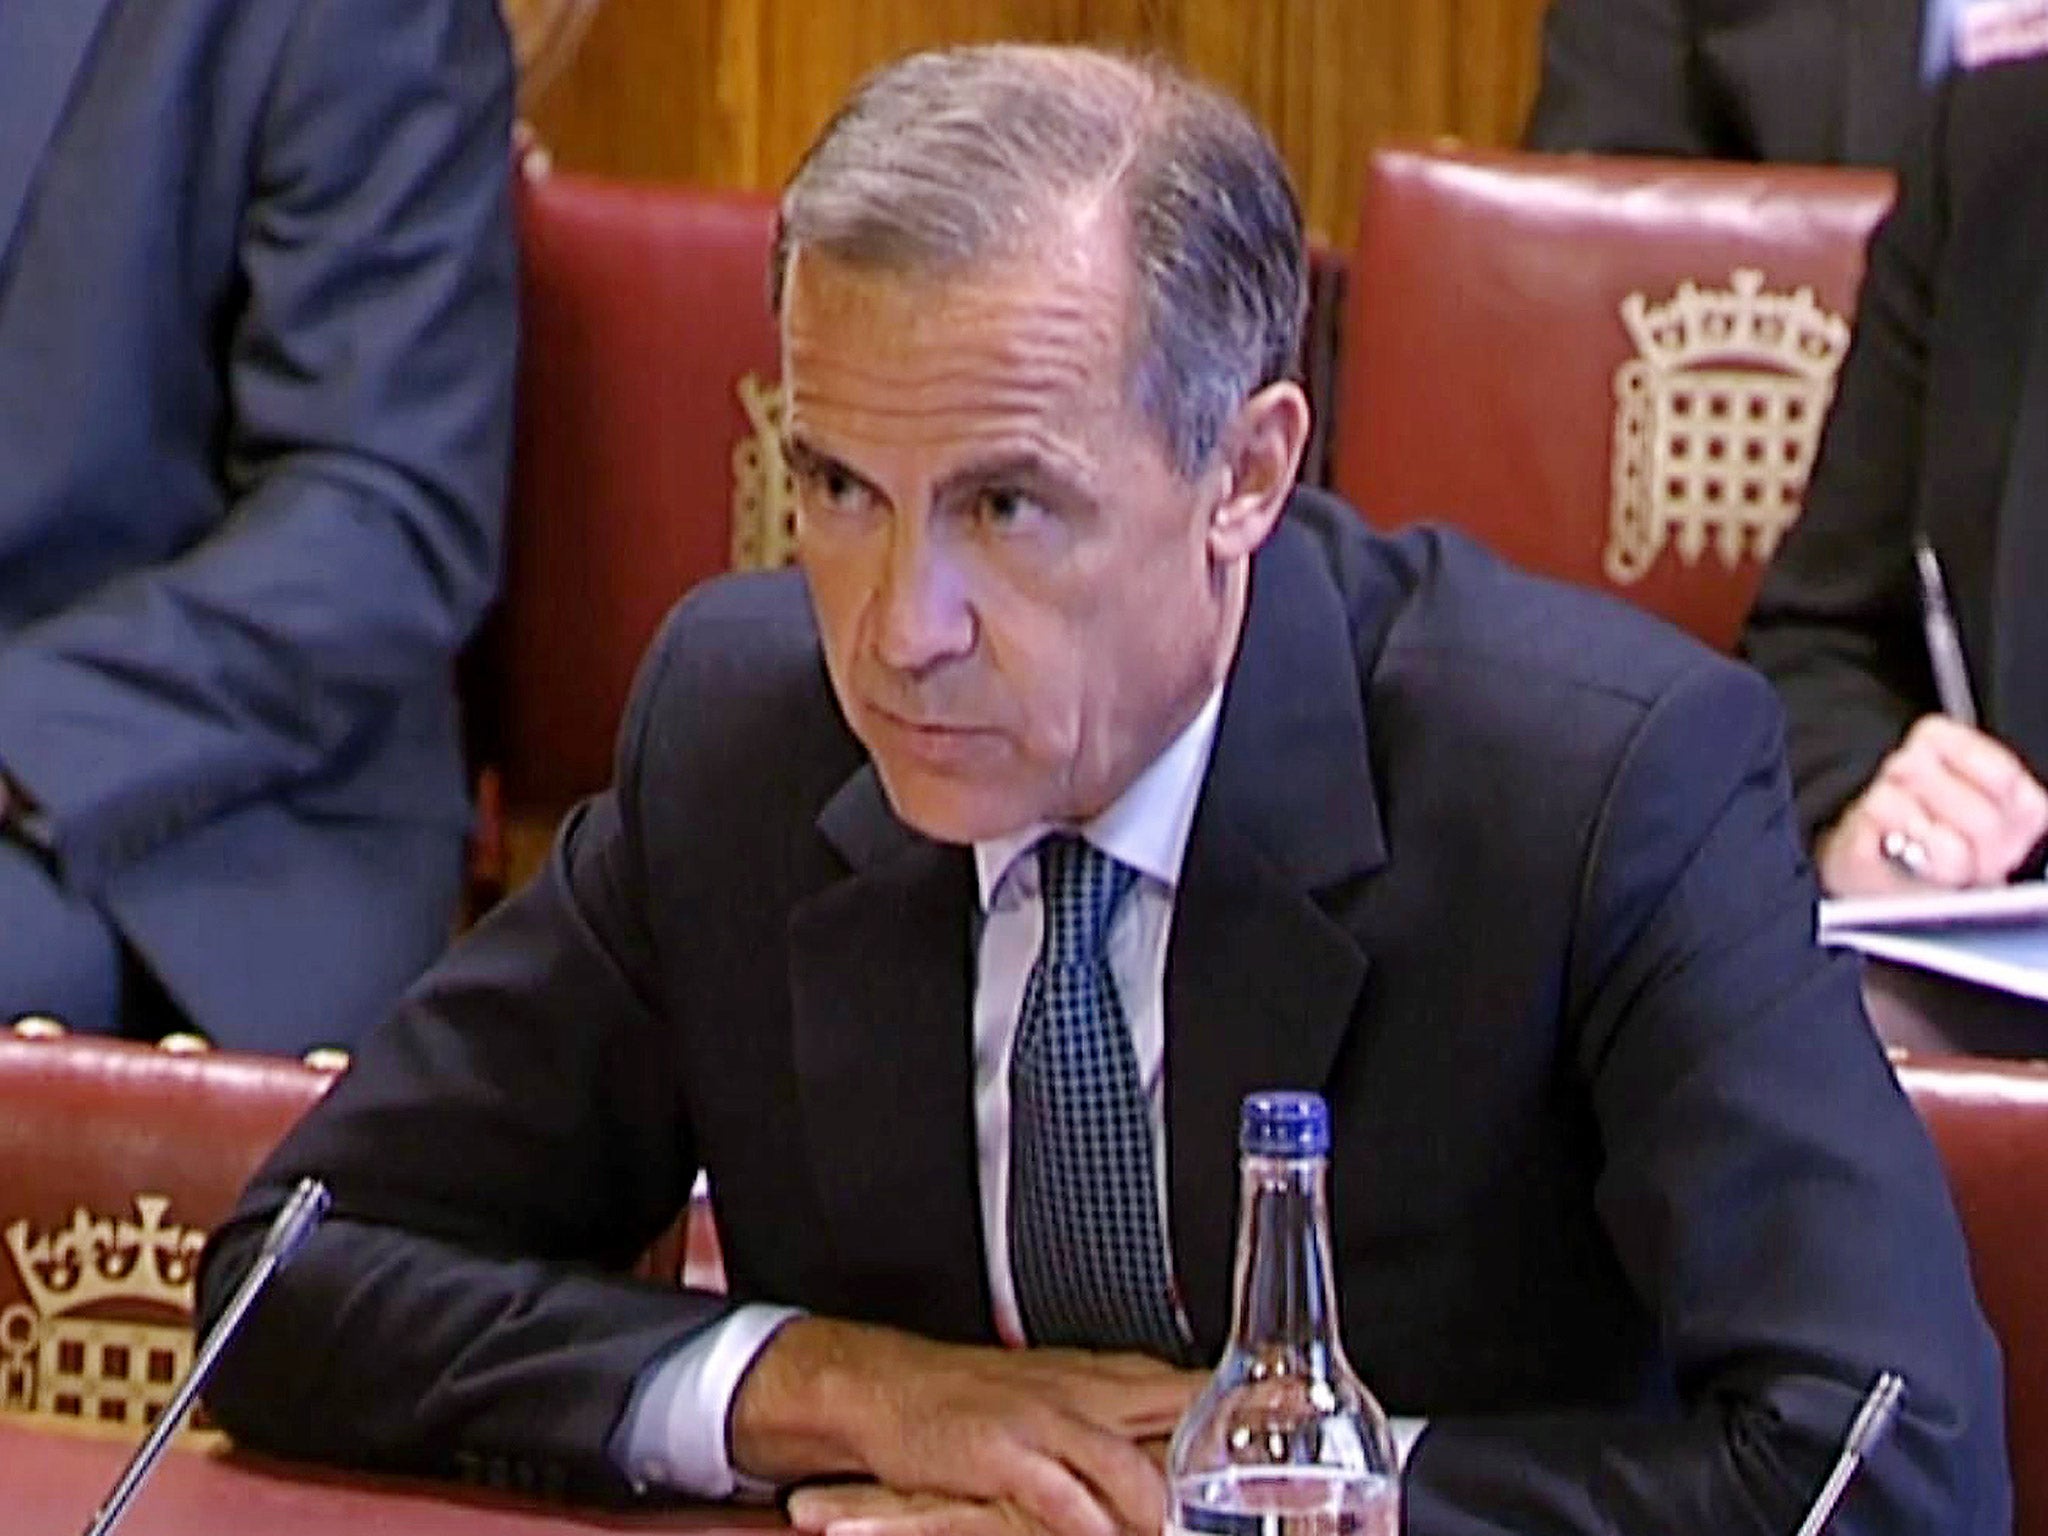 Mark Carney, Governor of the Bank of England, which may be making a decision on interest rates next week